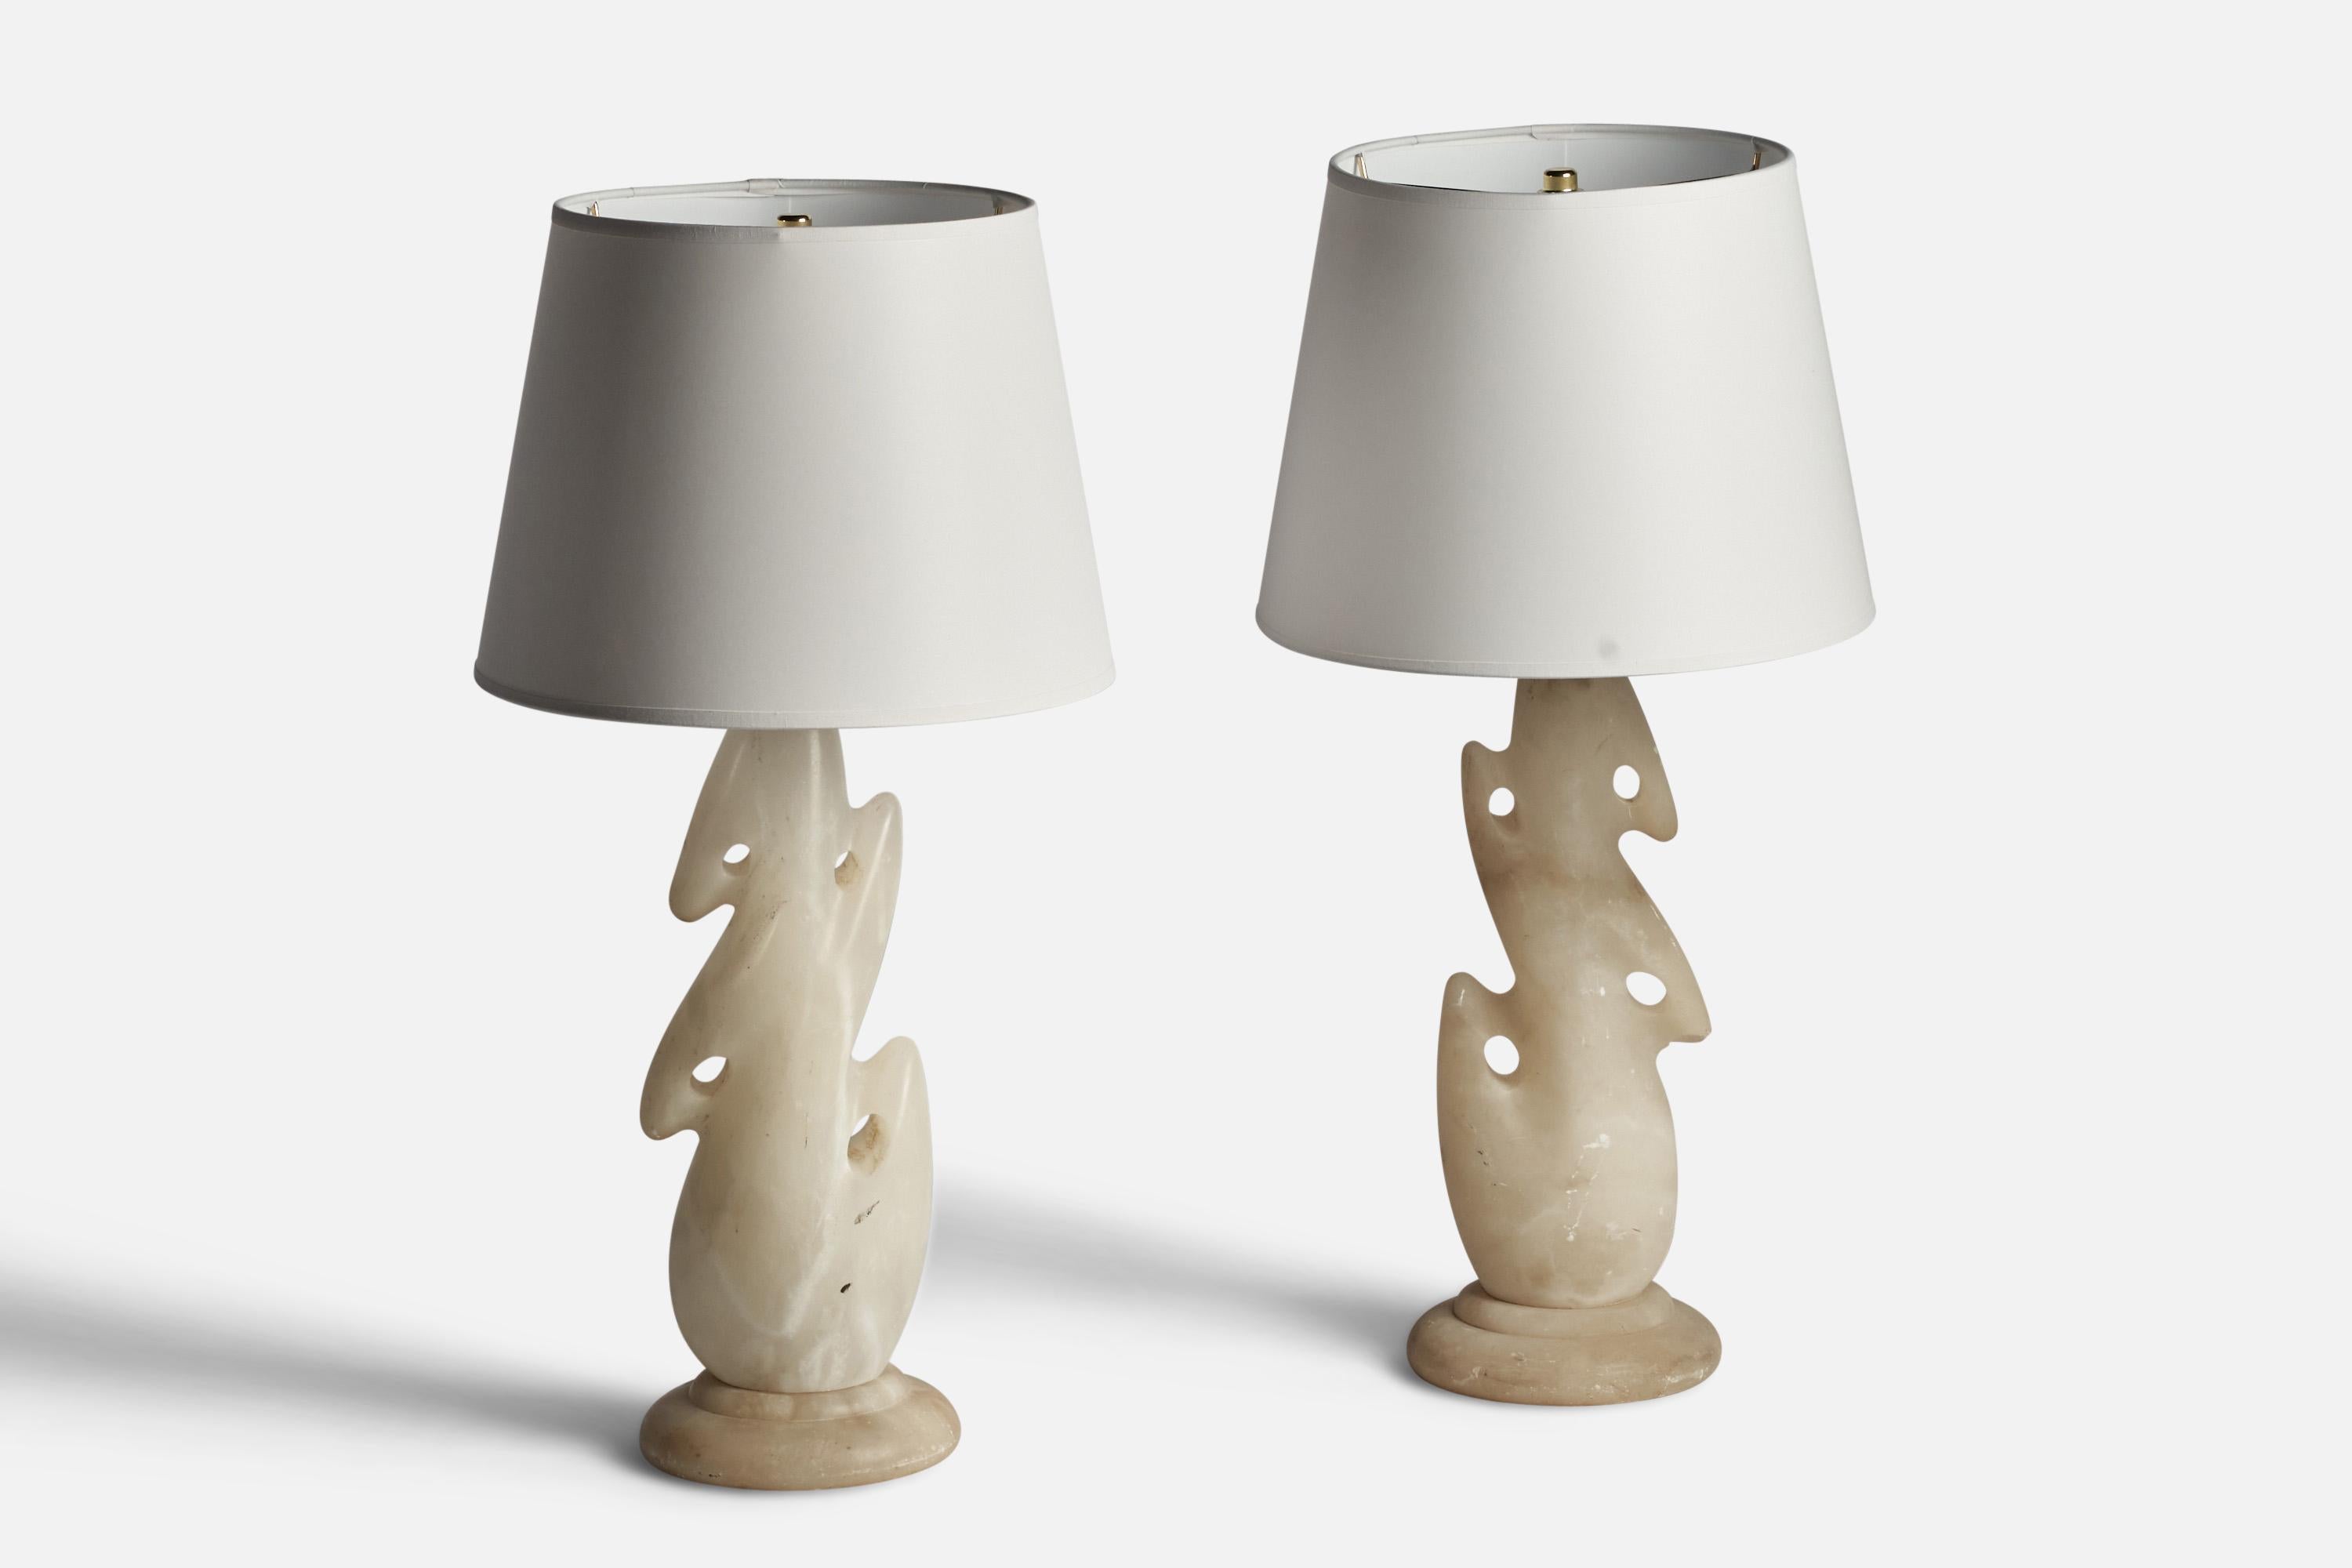 Mid-Century Modern American Designer, Freeform Table Lamps, Onyx, USA, 1950s For Sale